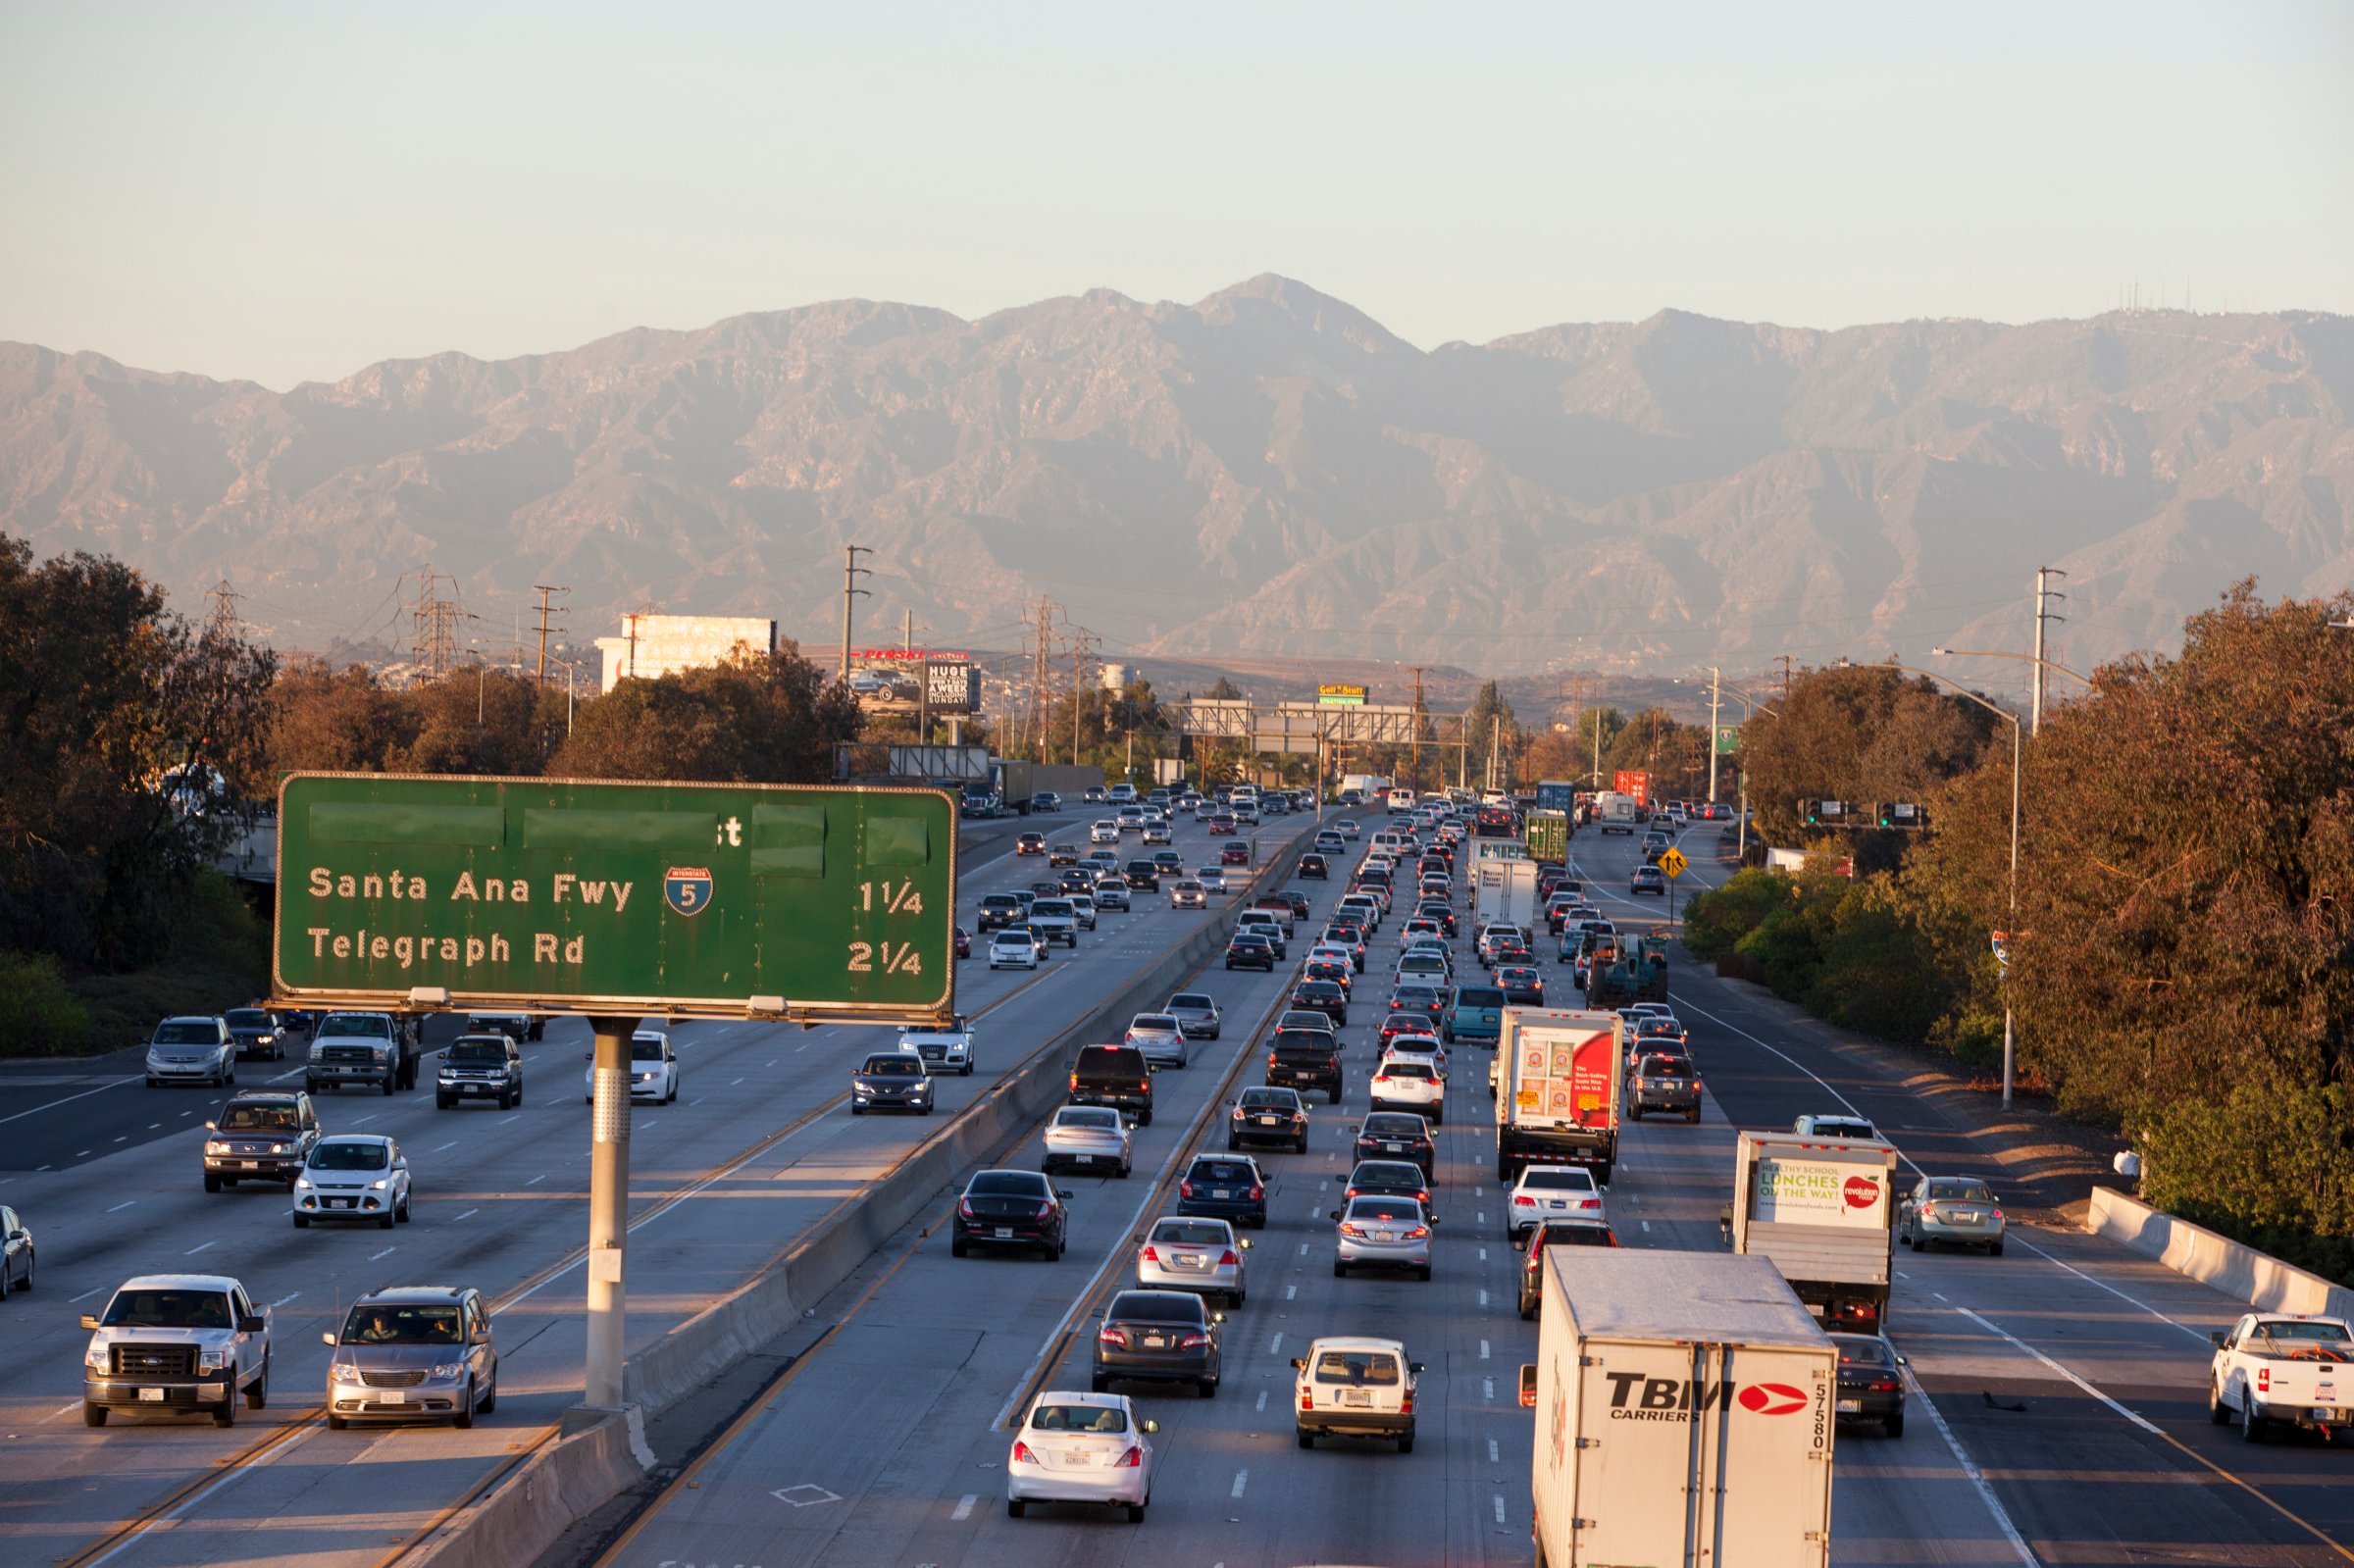 The 605 freeway is jammed with cars on a day when the mountains are visible in the distance, on November 5, 2014 in Los Angeles, California.